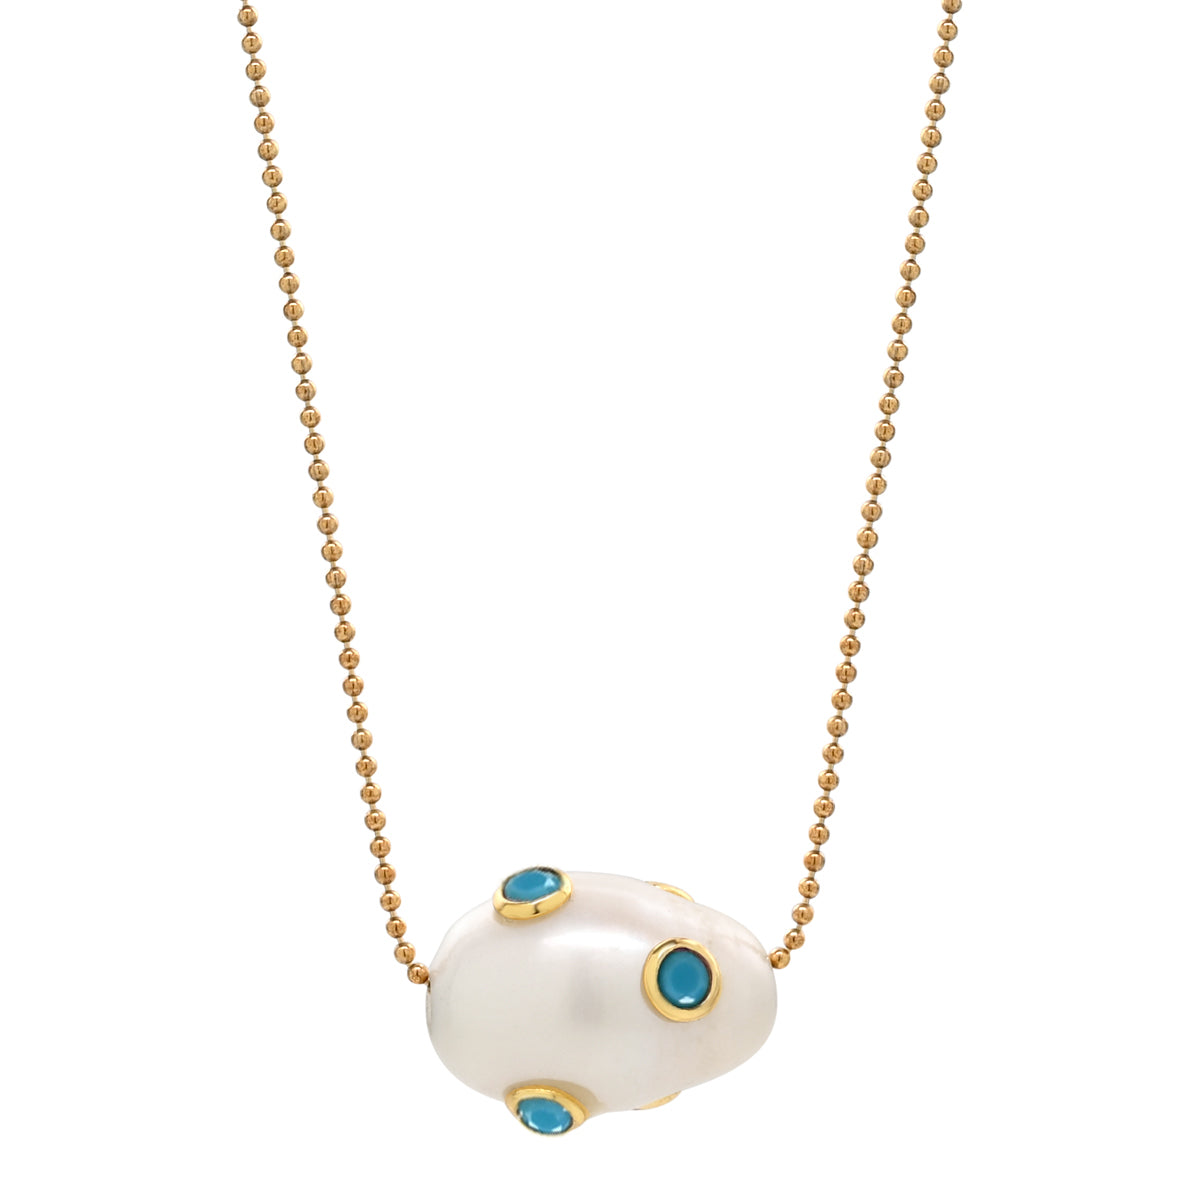 Studded Pearl Necklace - More Colors Available